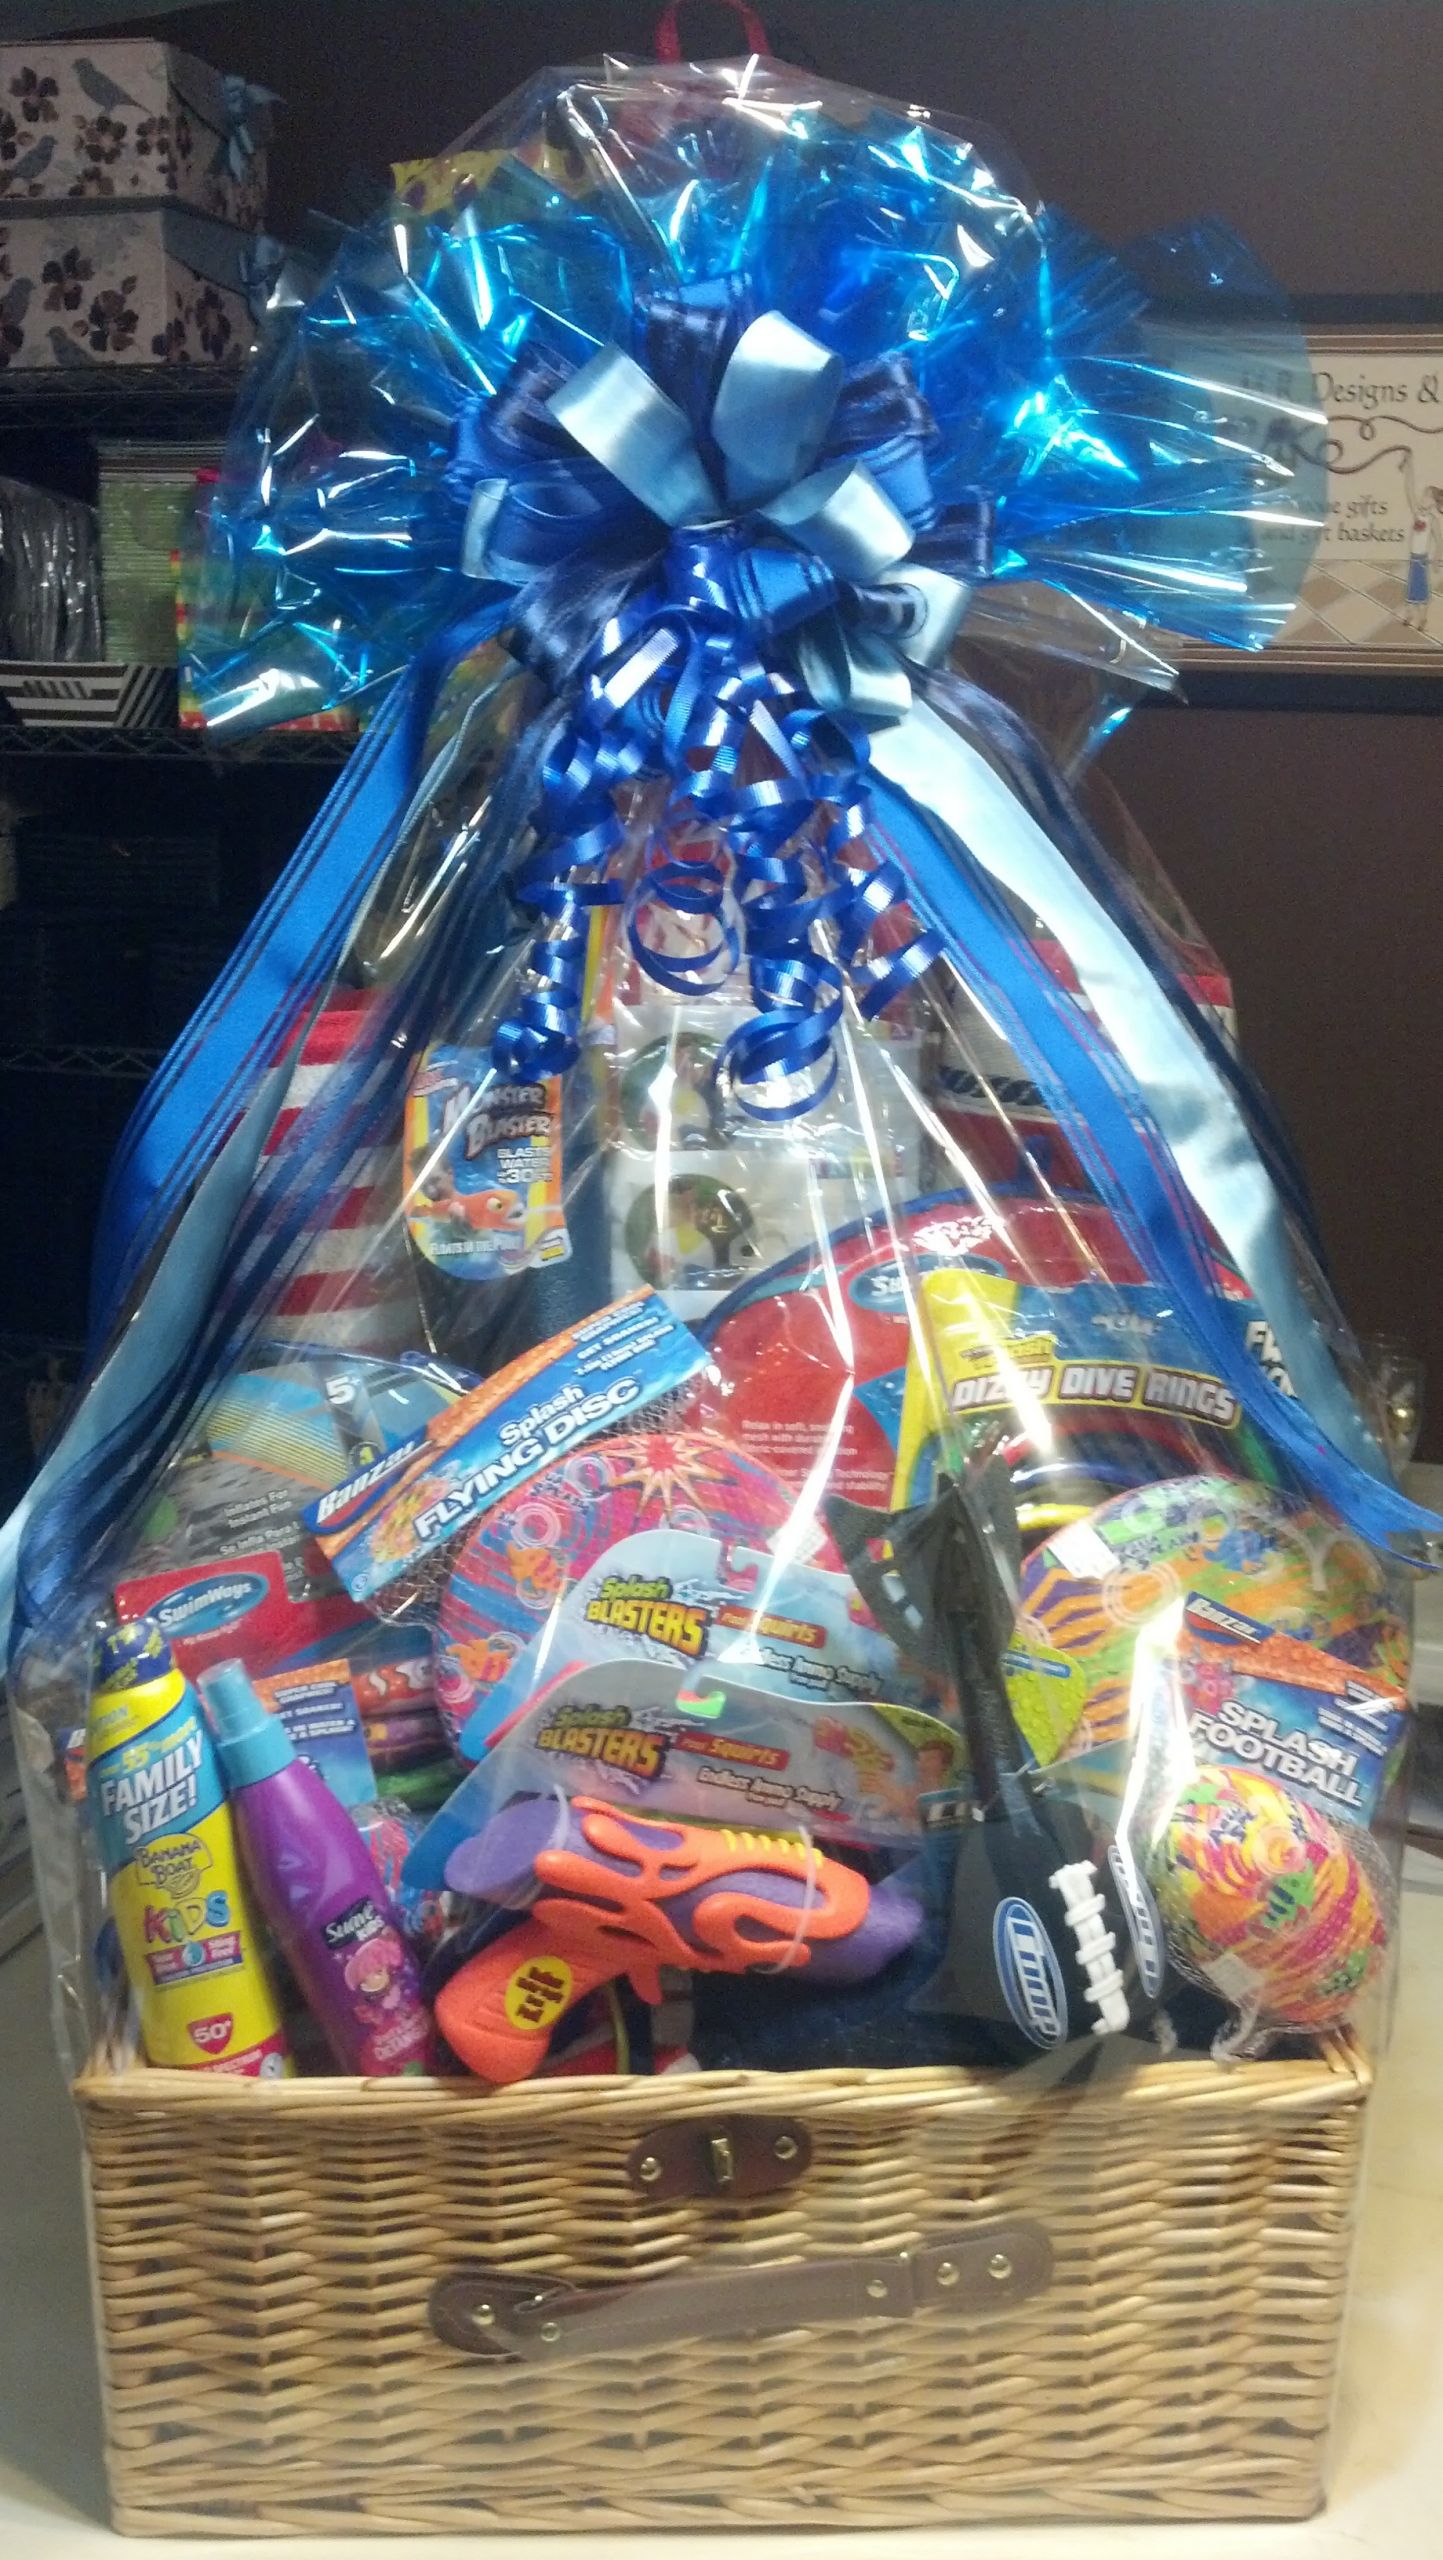 Gift Basket Theme Ideas For Raffle
 Special Event and Silent Auction Gift Basket Ideas by M R